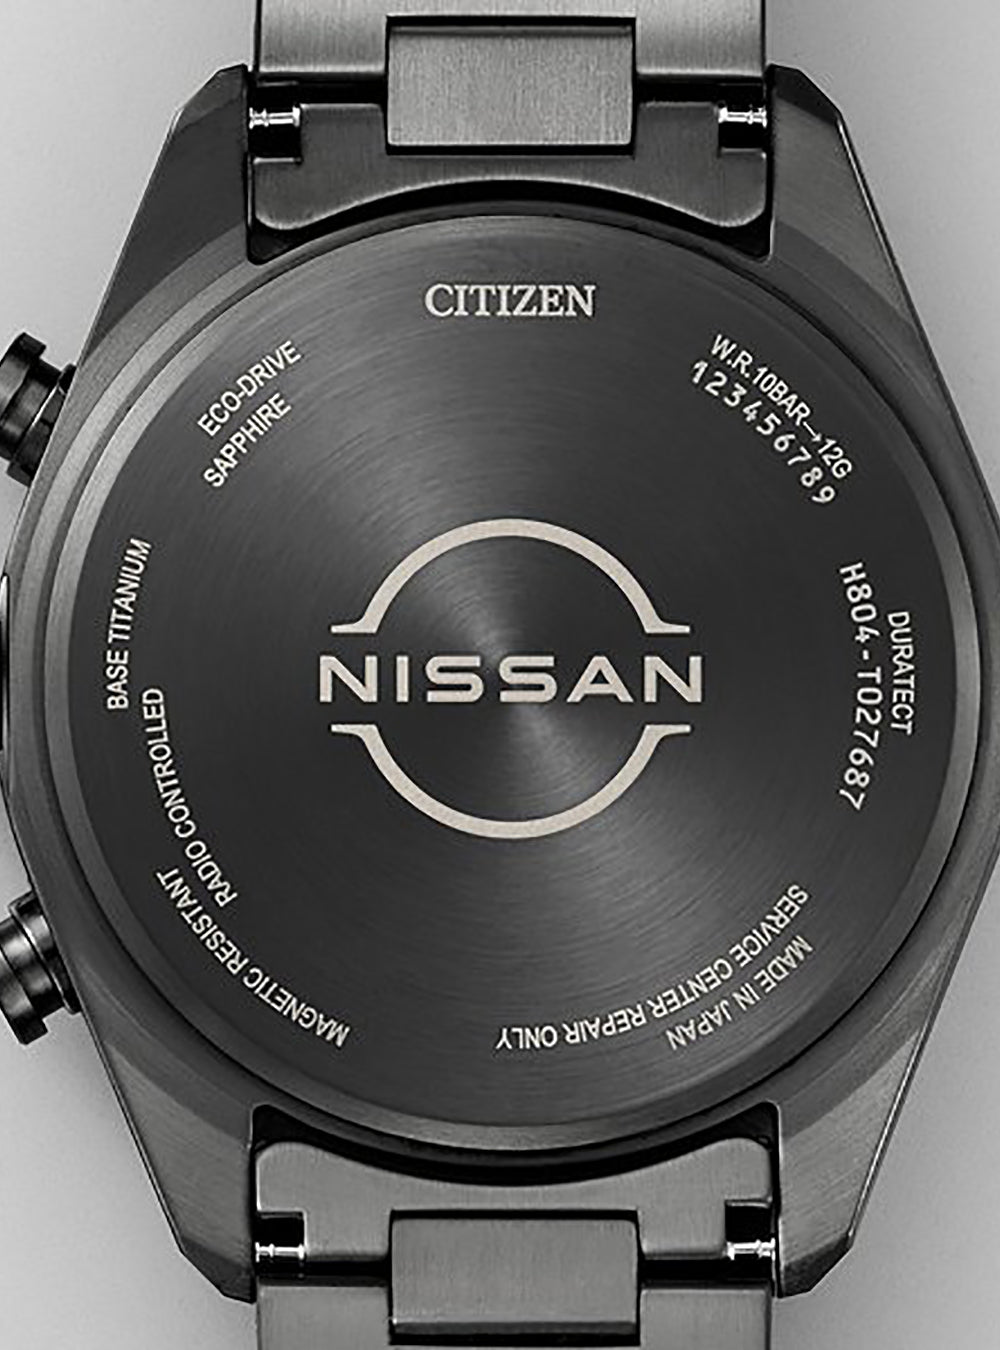 CITIZEN ATTESA ACT LINE NISSAN FAIRLADY Z COLLABORATION MODEL AT8185-97E LIMITED EDITION MADE IN JAPAN JDMjapan-select4974375506824WatchesCITIZEN